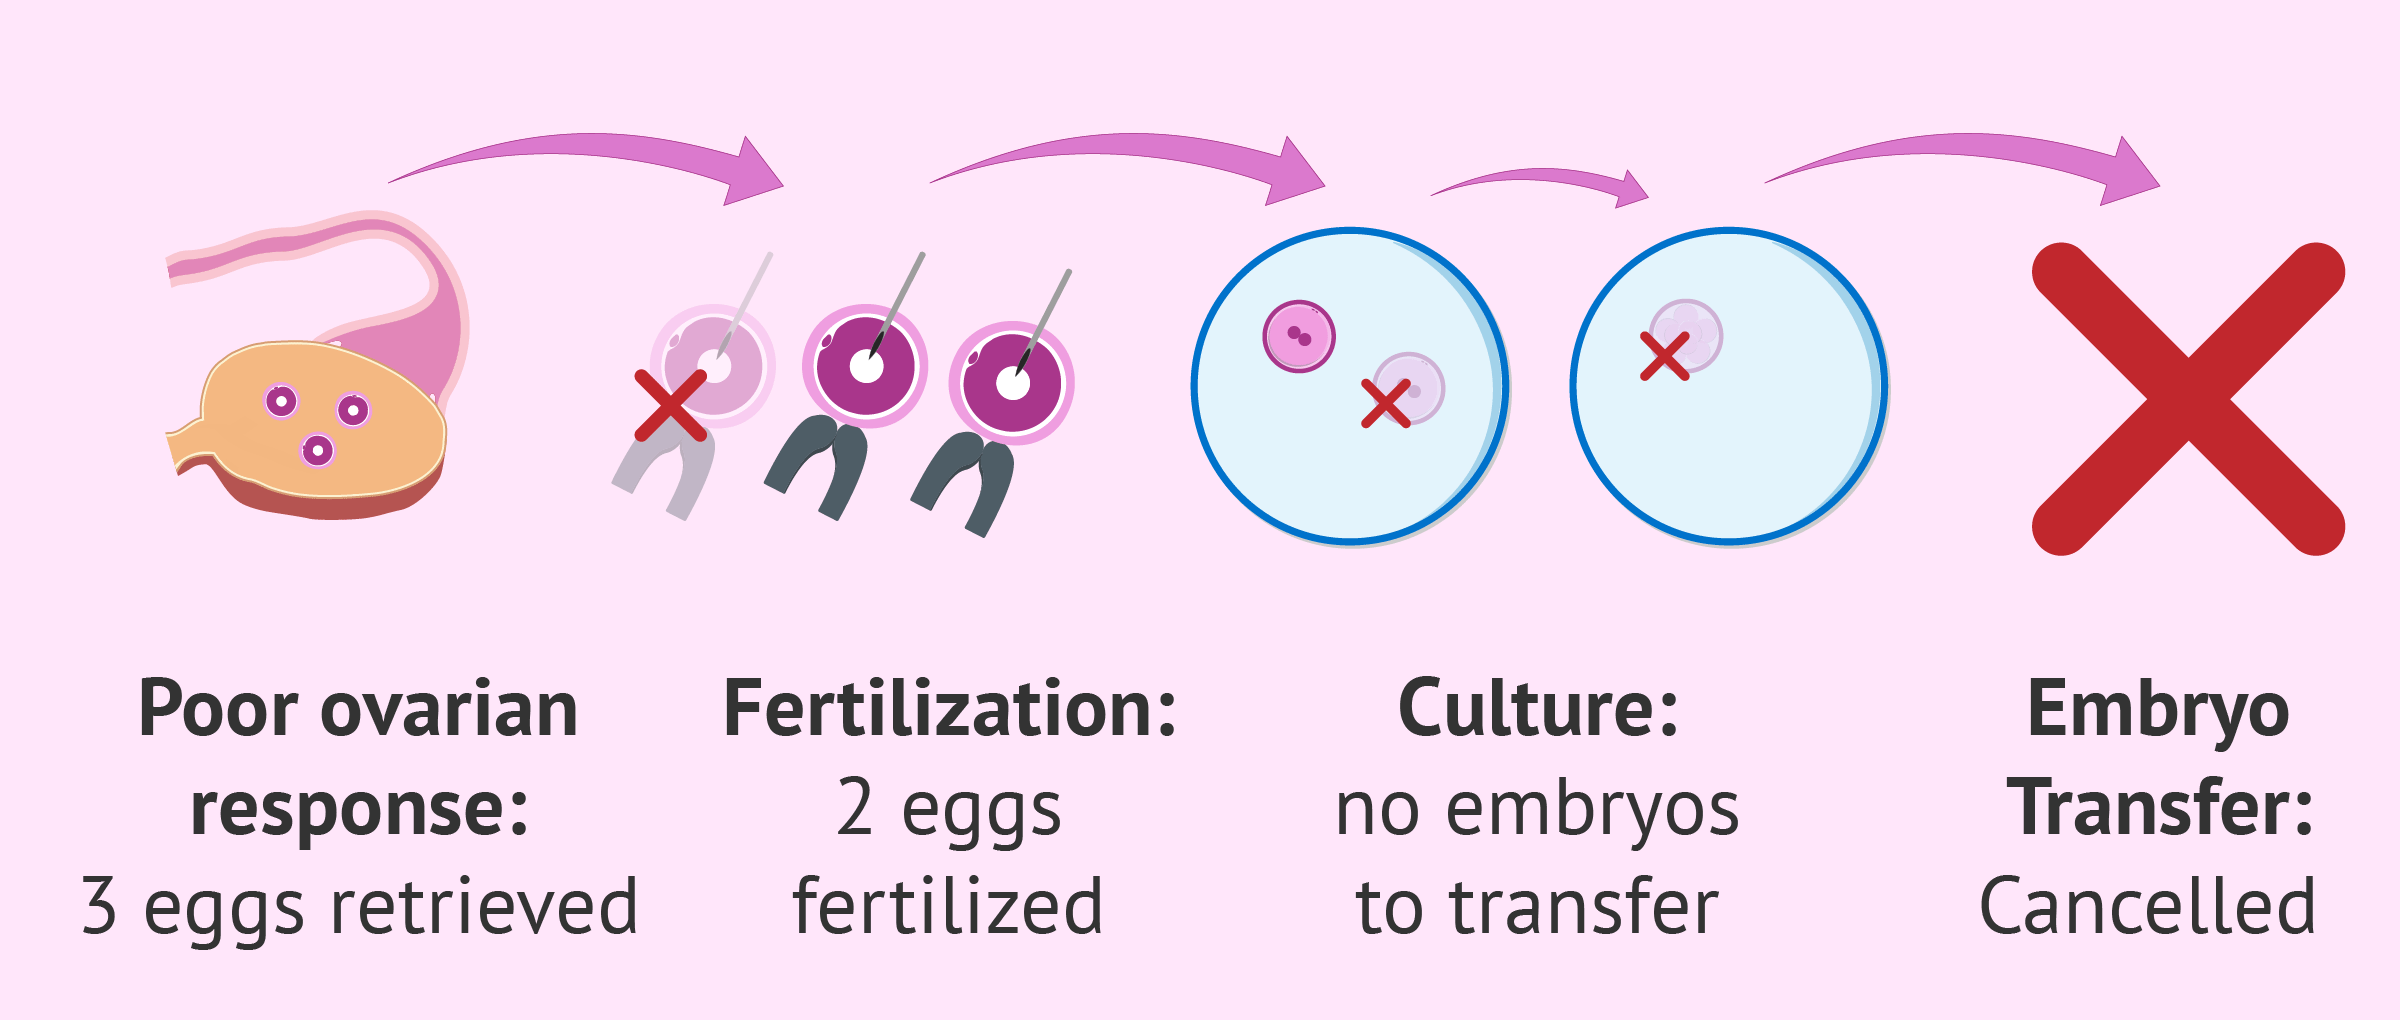 Cancellation of IVF cycles for poor ovarian response